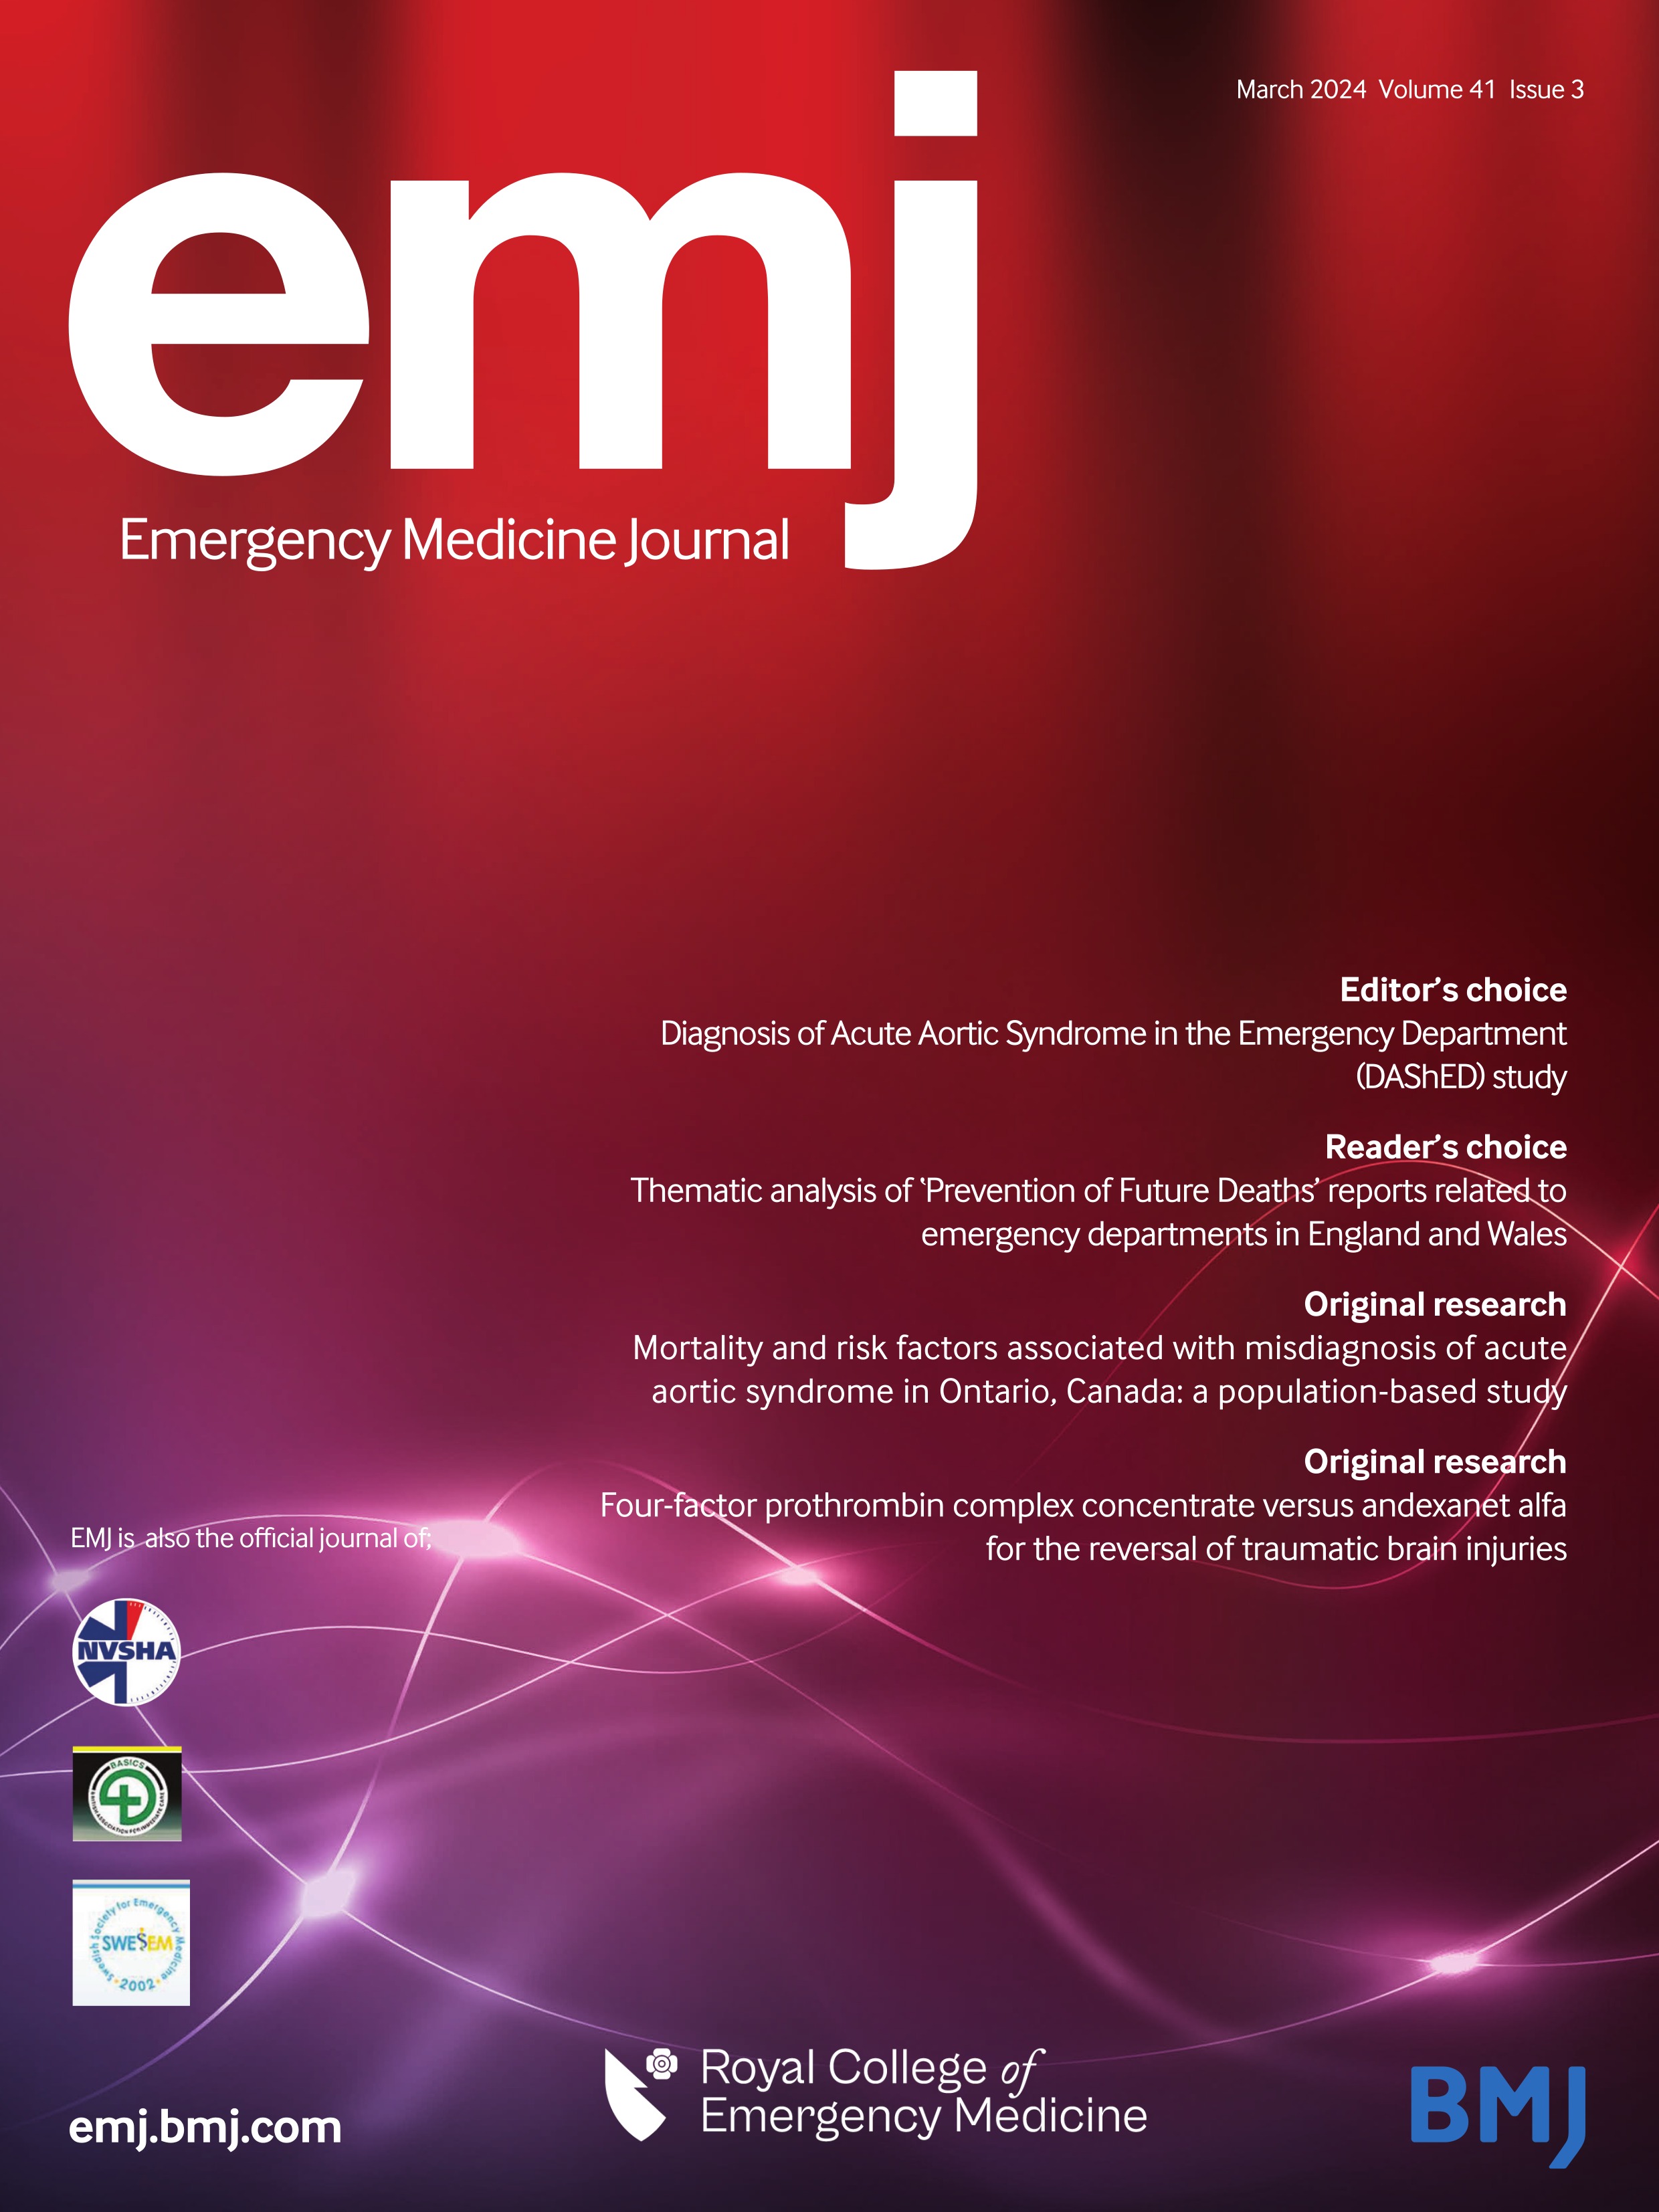 Diagnosis of Acute Aortic Syndrome in the Emergency Department (DAShED) study: an observational cohort study of people attending the emergency department with symptoms consistent with acute aortic syndrome